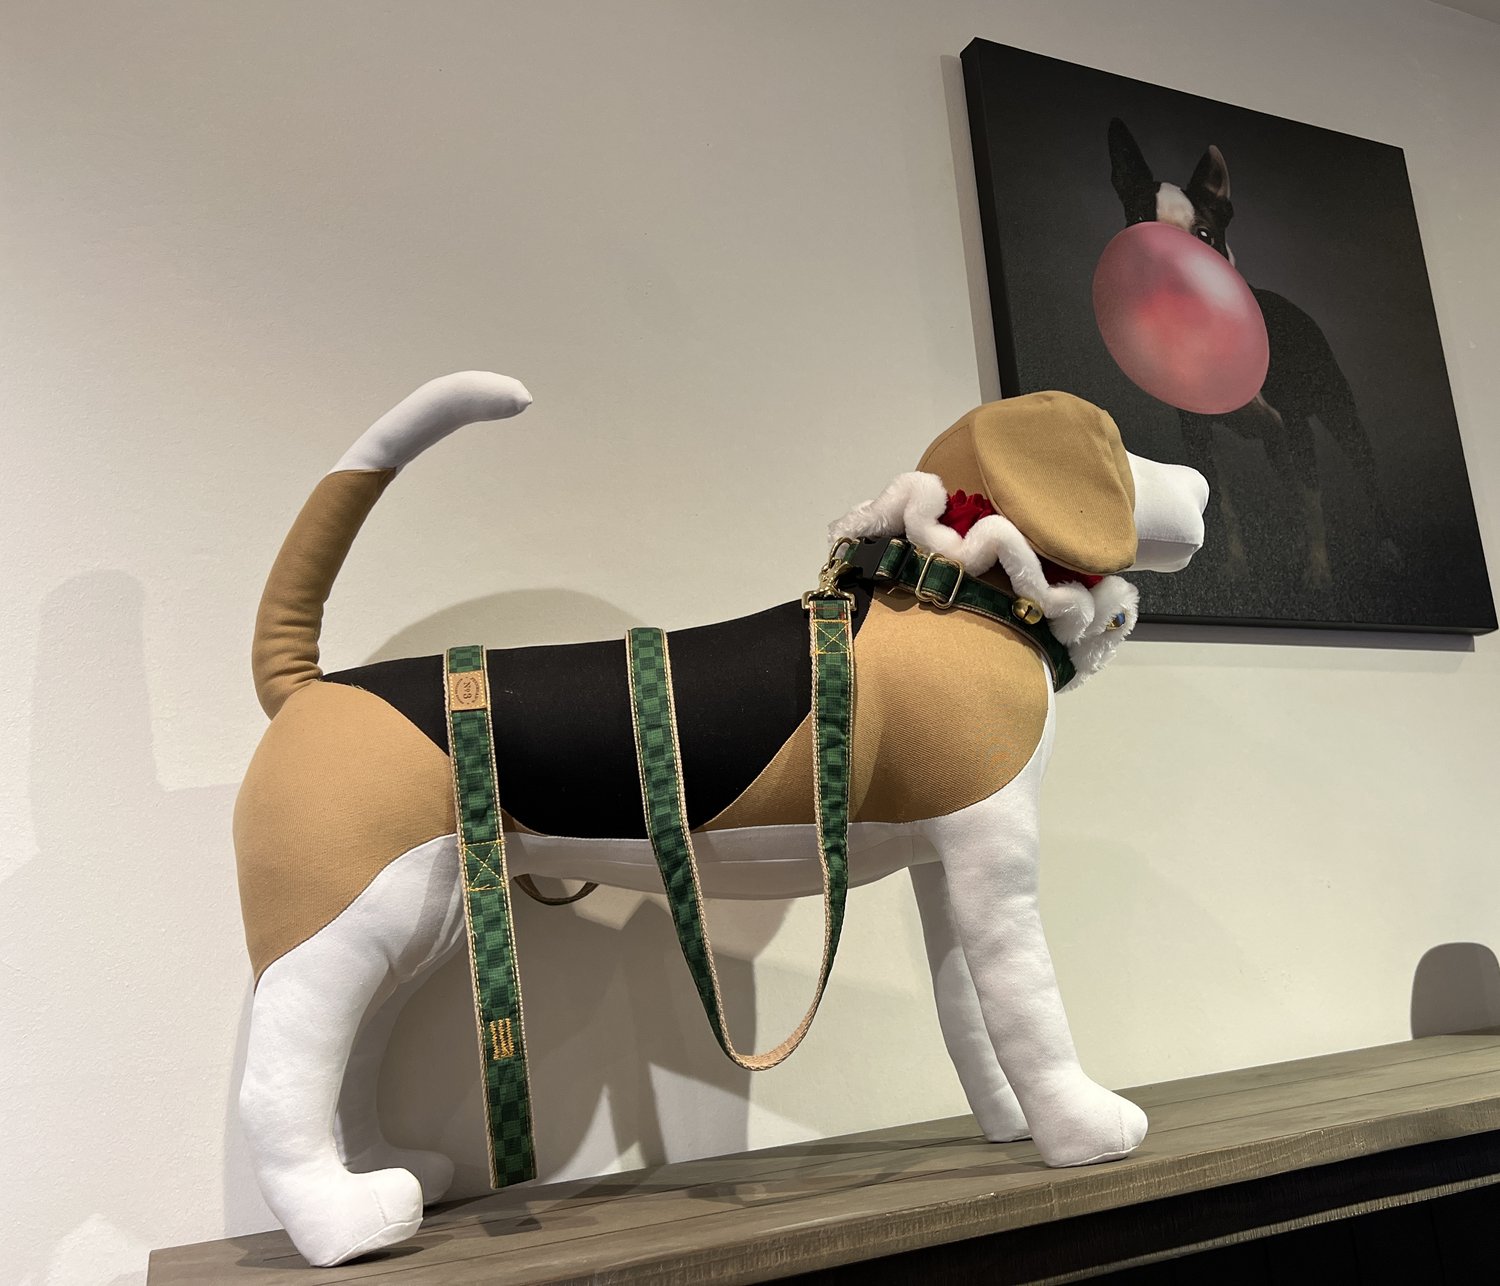 Panache Display - Introducing Bailey our new #dog #mannequin collection.  Bailey is a beagle style dog available in three versatile positions, he is  perfect for displaying current trends in canine fashion from